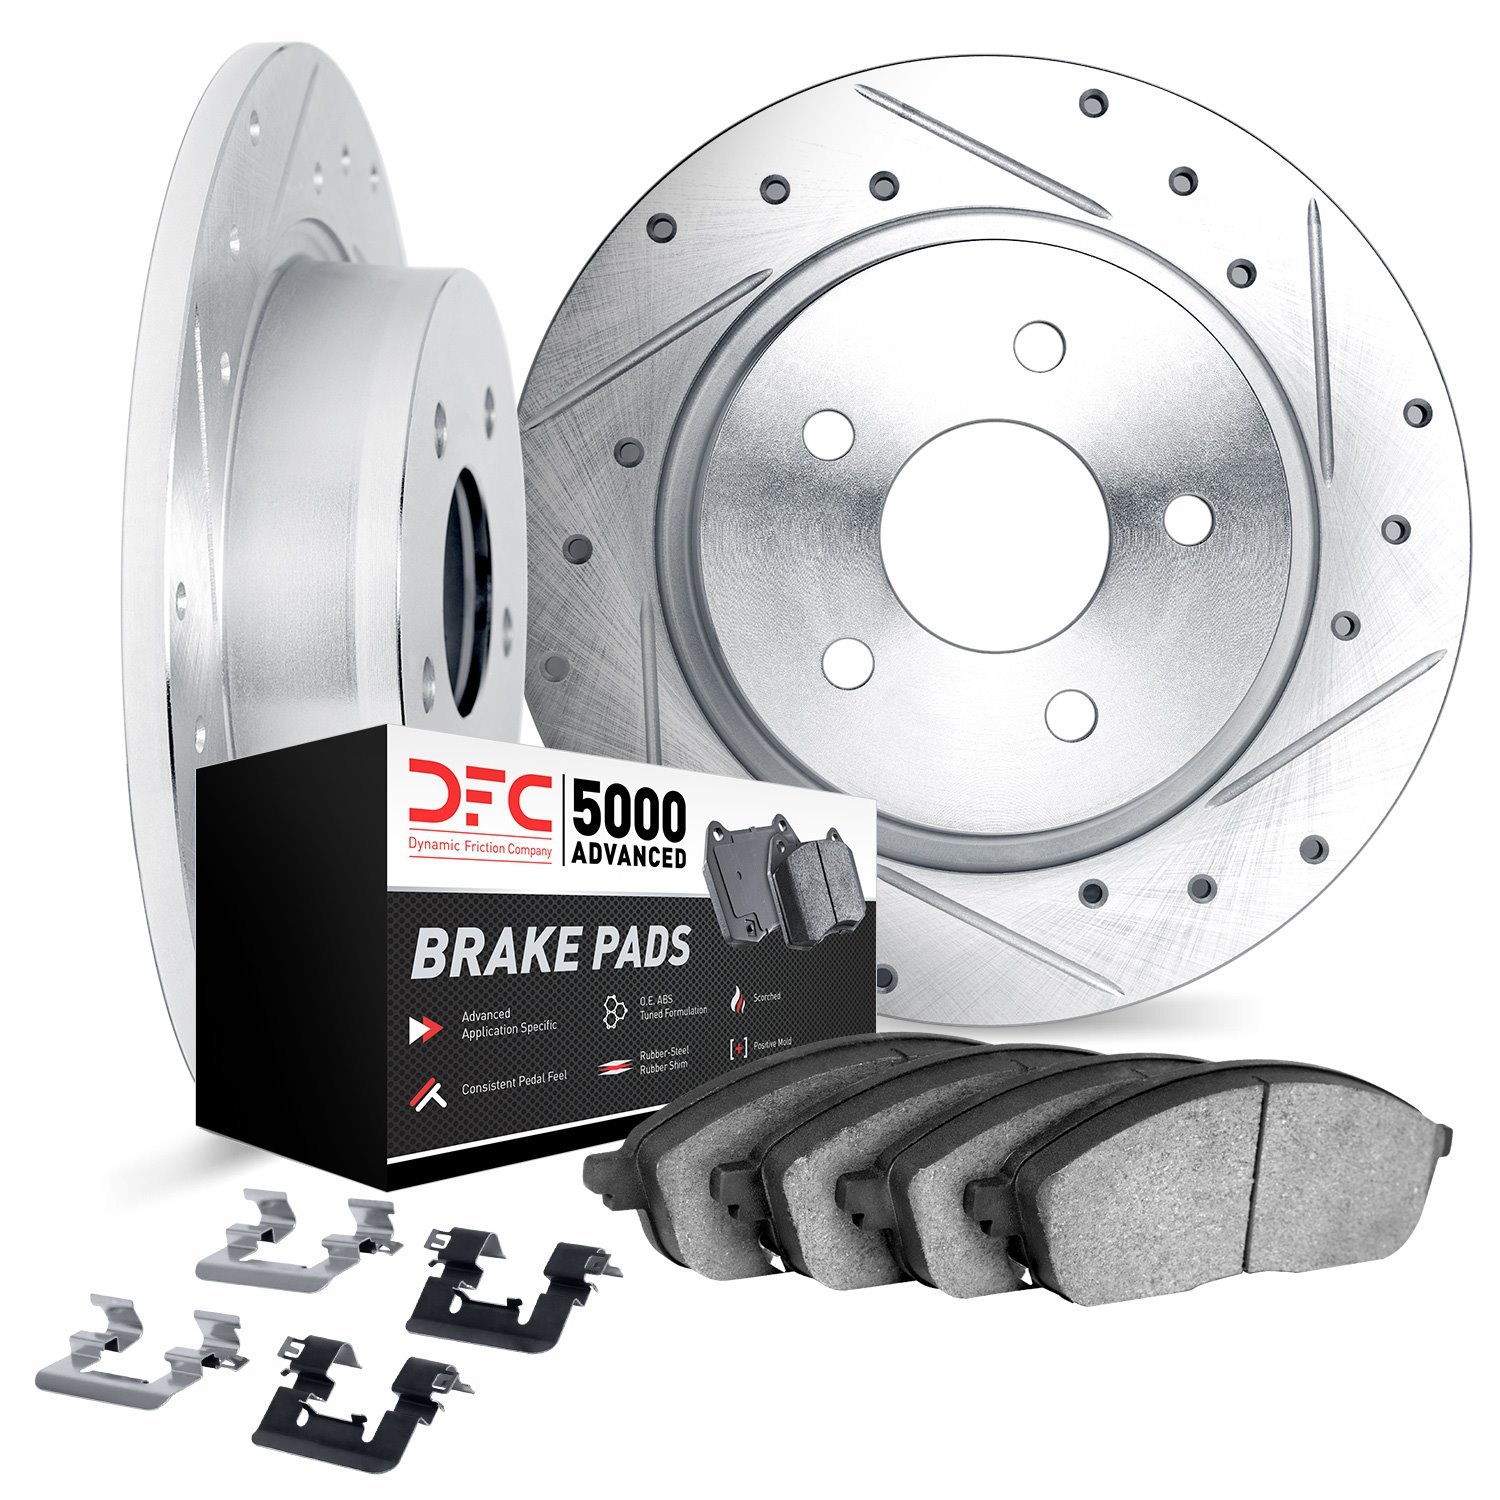 7512-73099 Drilled/Slotted Brake Rotors w/5000 Advanced Brake Pads Kit & Hardware [Silver], Fits Select Audi/Volkswagen, Positio